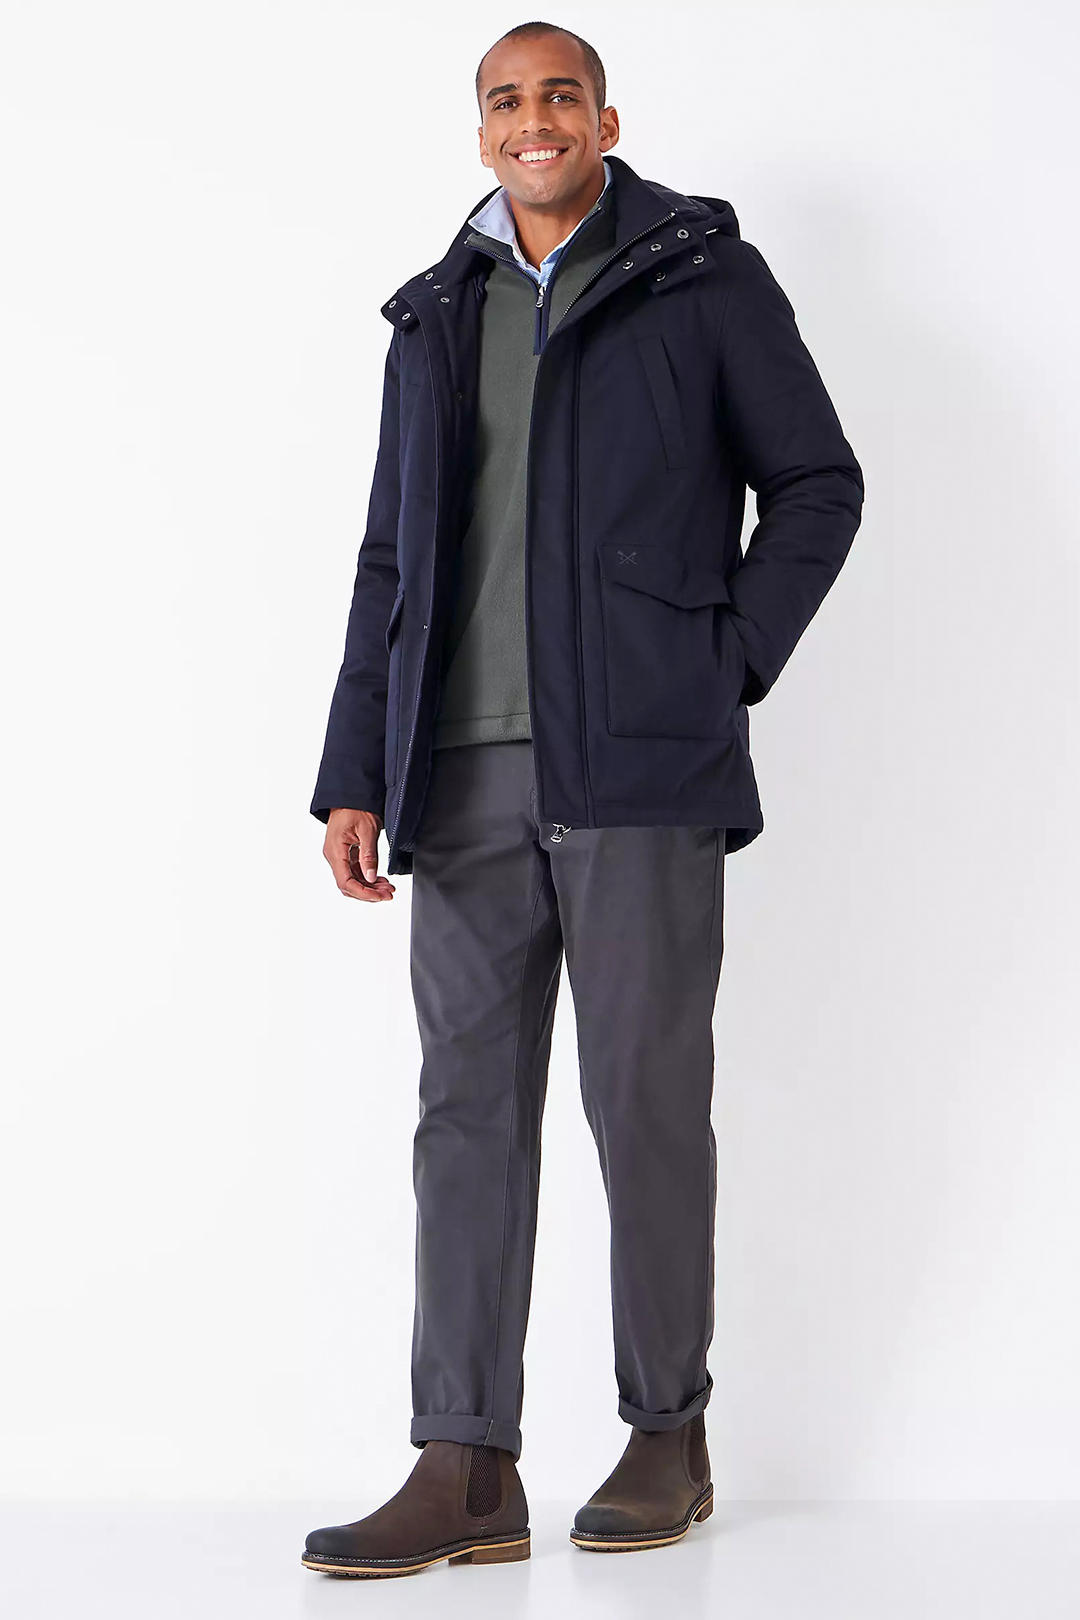 Navy parka jacket, olive sweater, light blue dress shirt, charcoal chinos, and brown suede Chelsea boots outfit